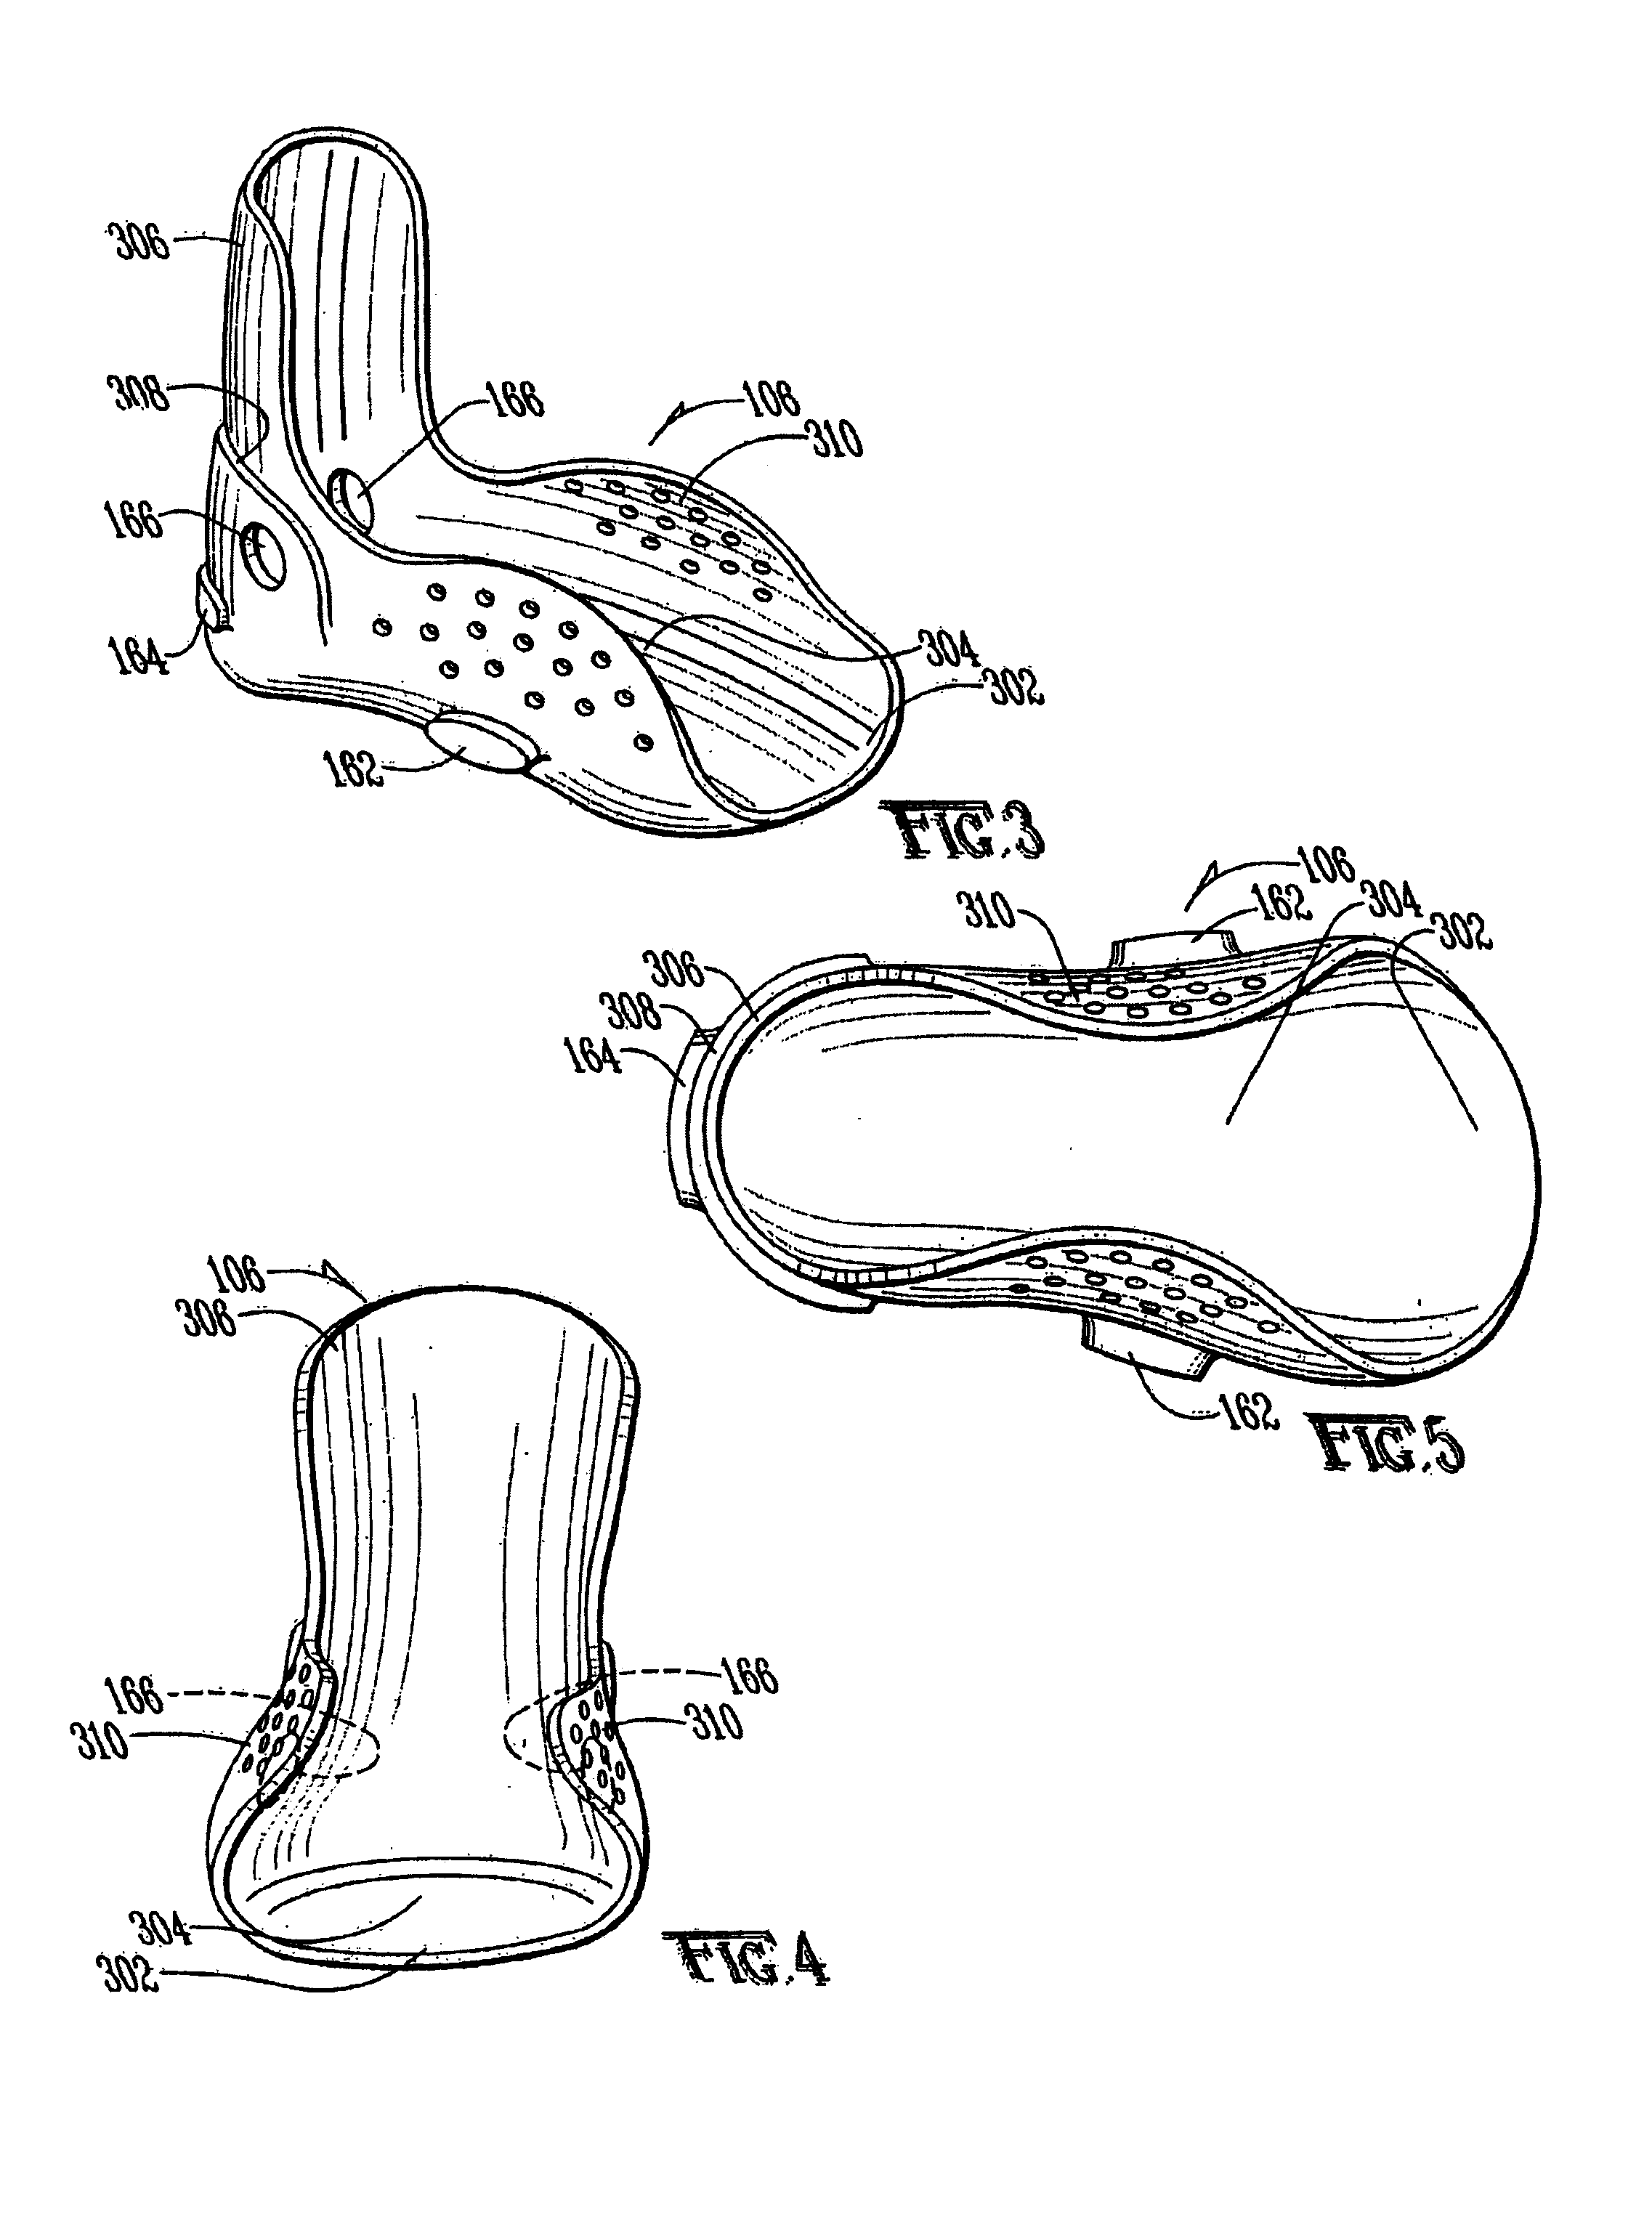 System and method for correcting club foot problems in children